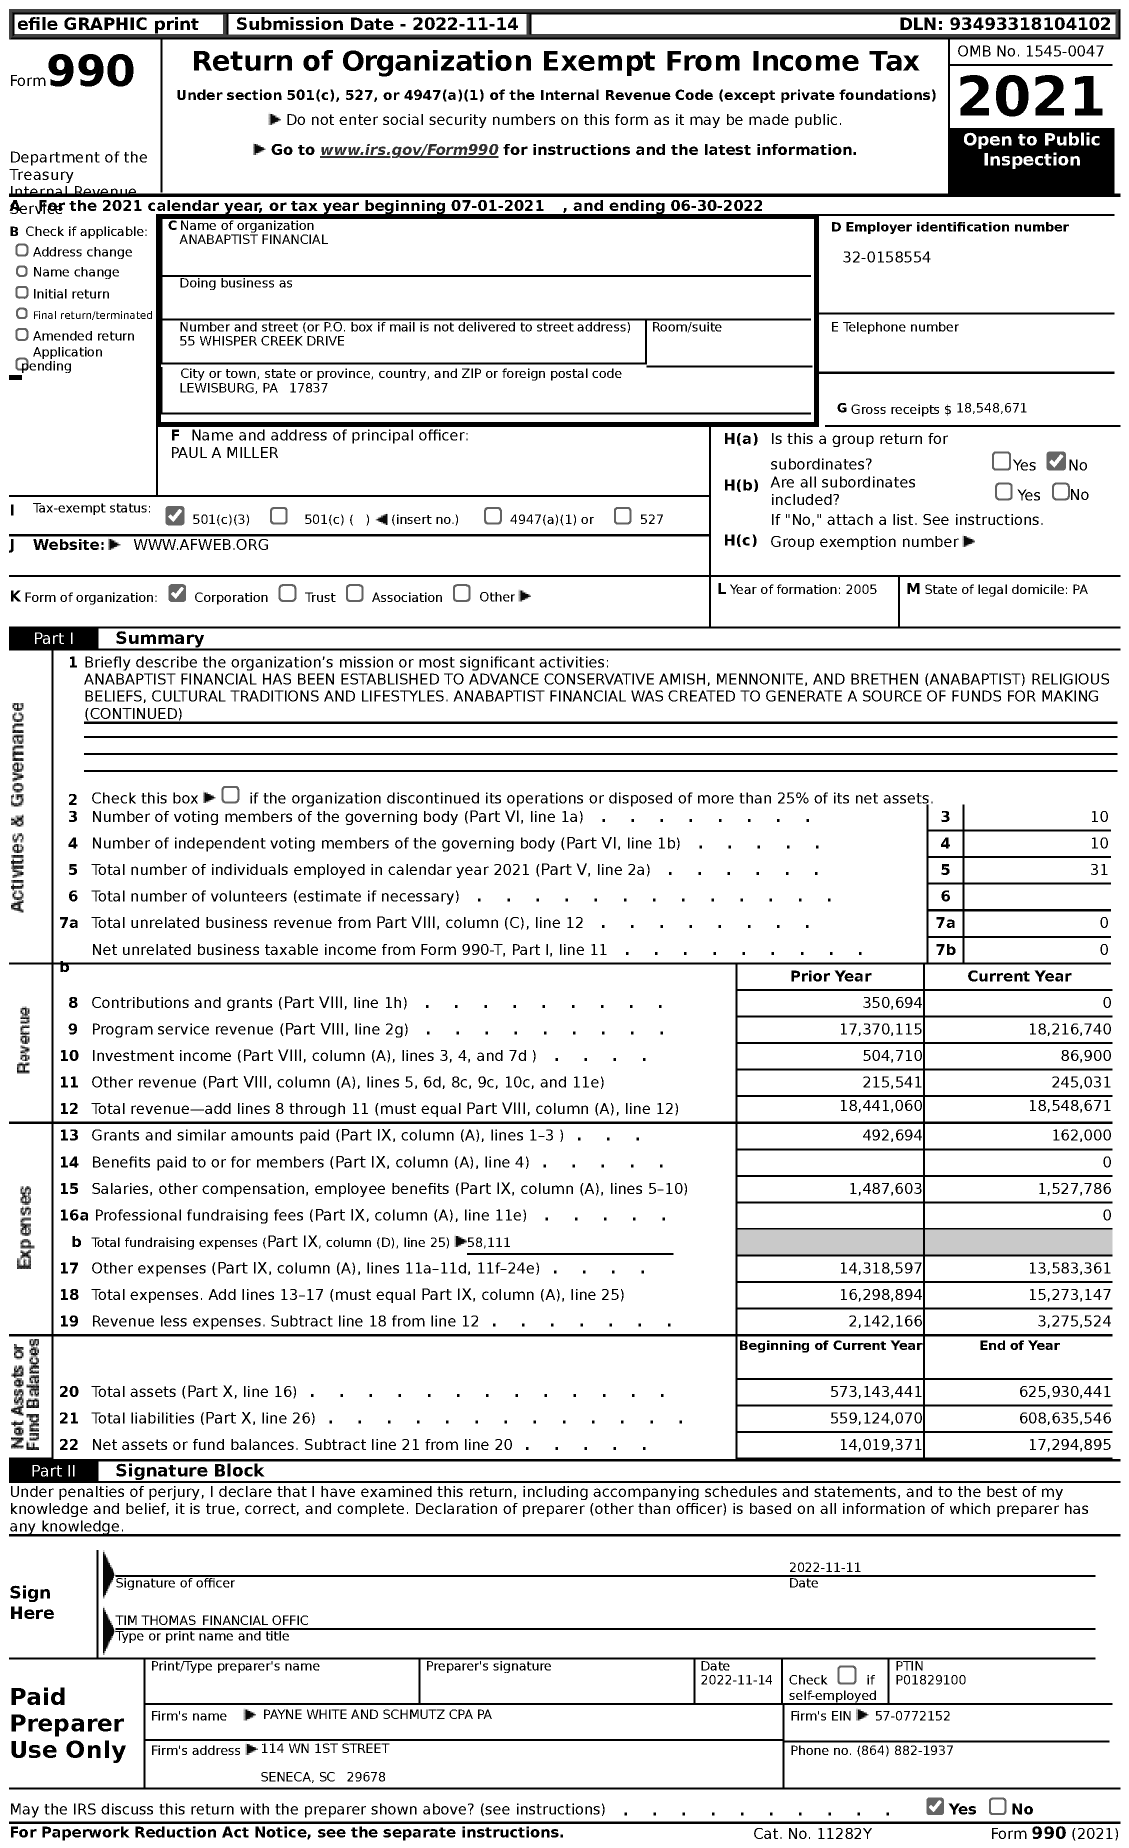 Image of first page of 2021 Form 990 for Anabaptist Financial